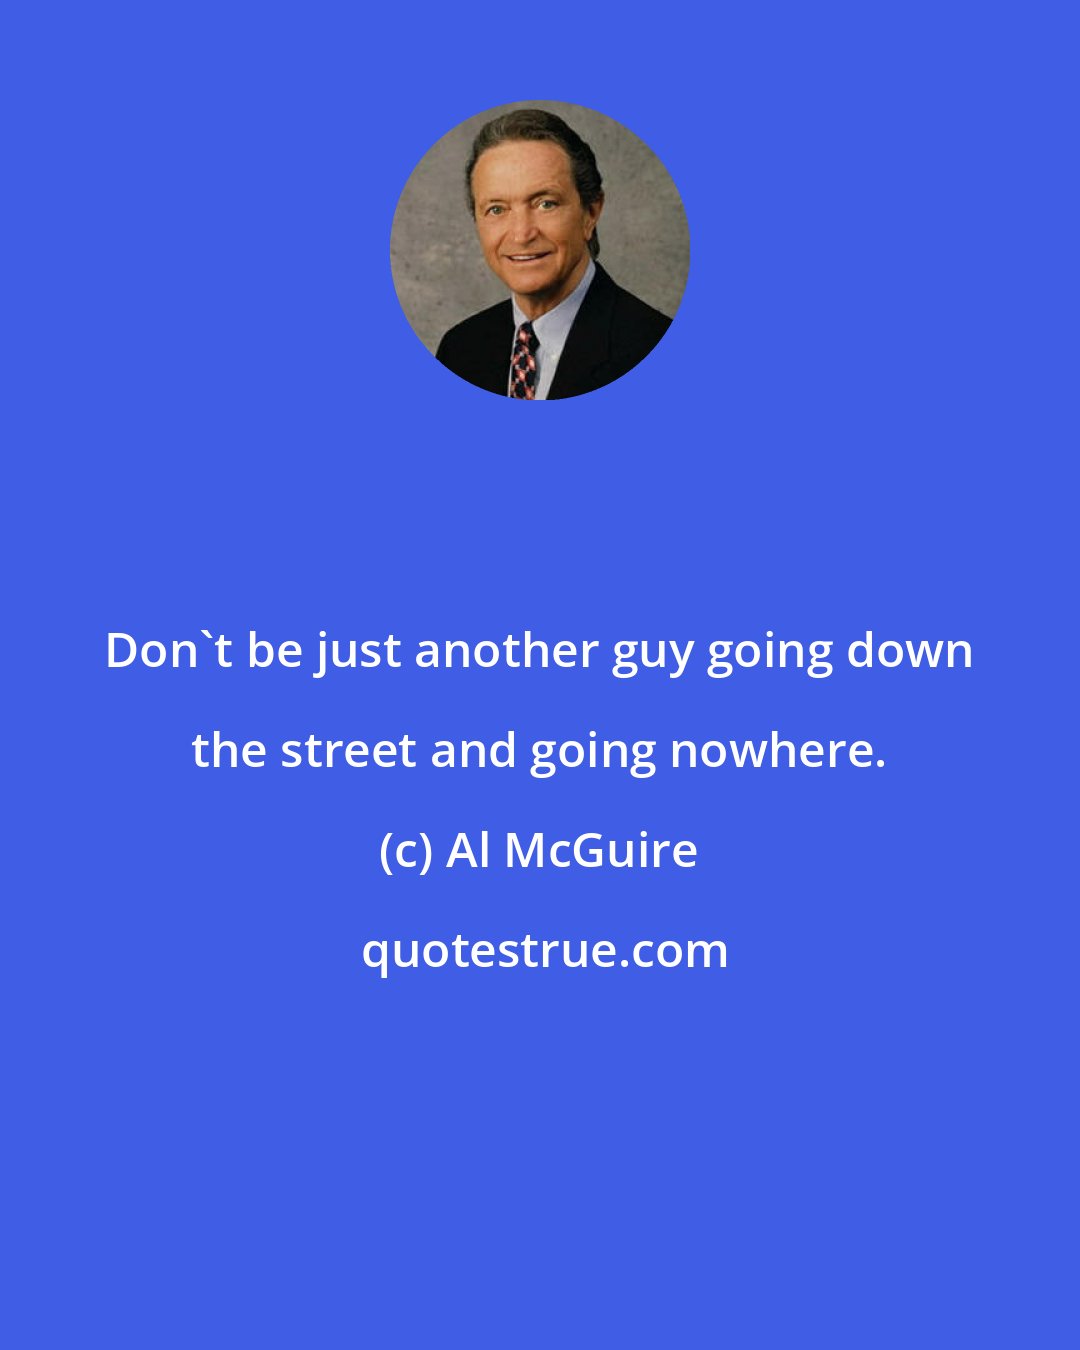 Al McGuire: Don't be just another guy going down the street and going nowhere.